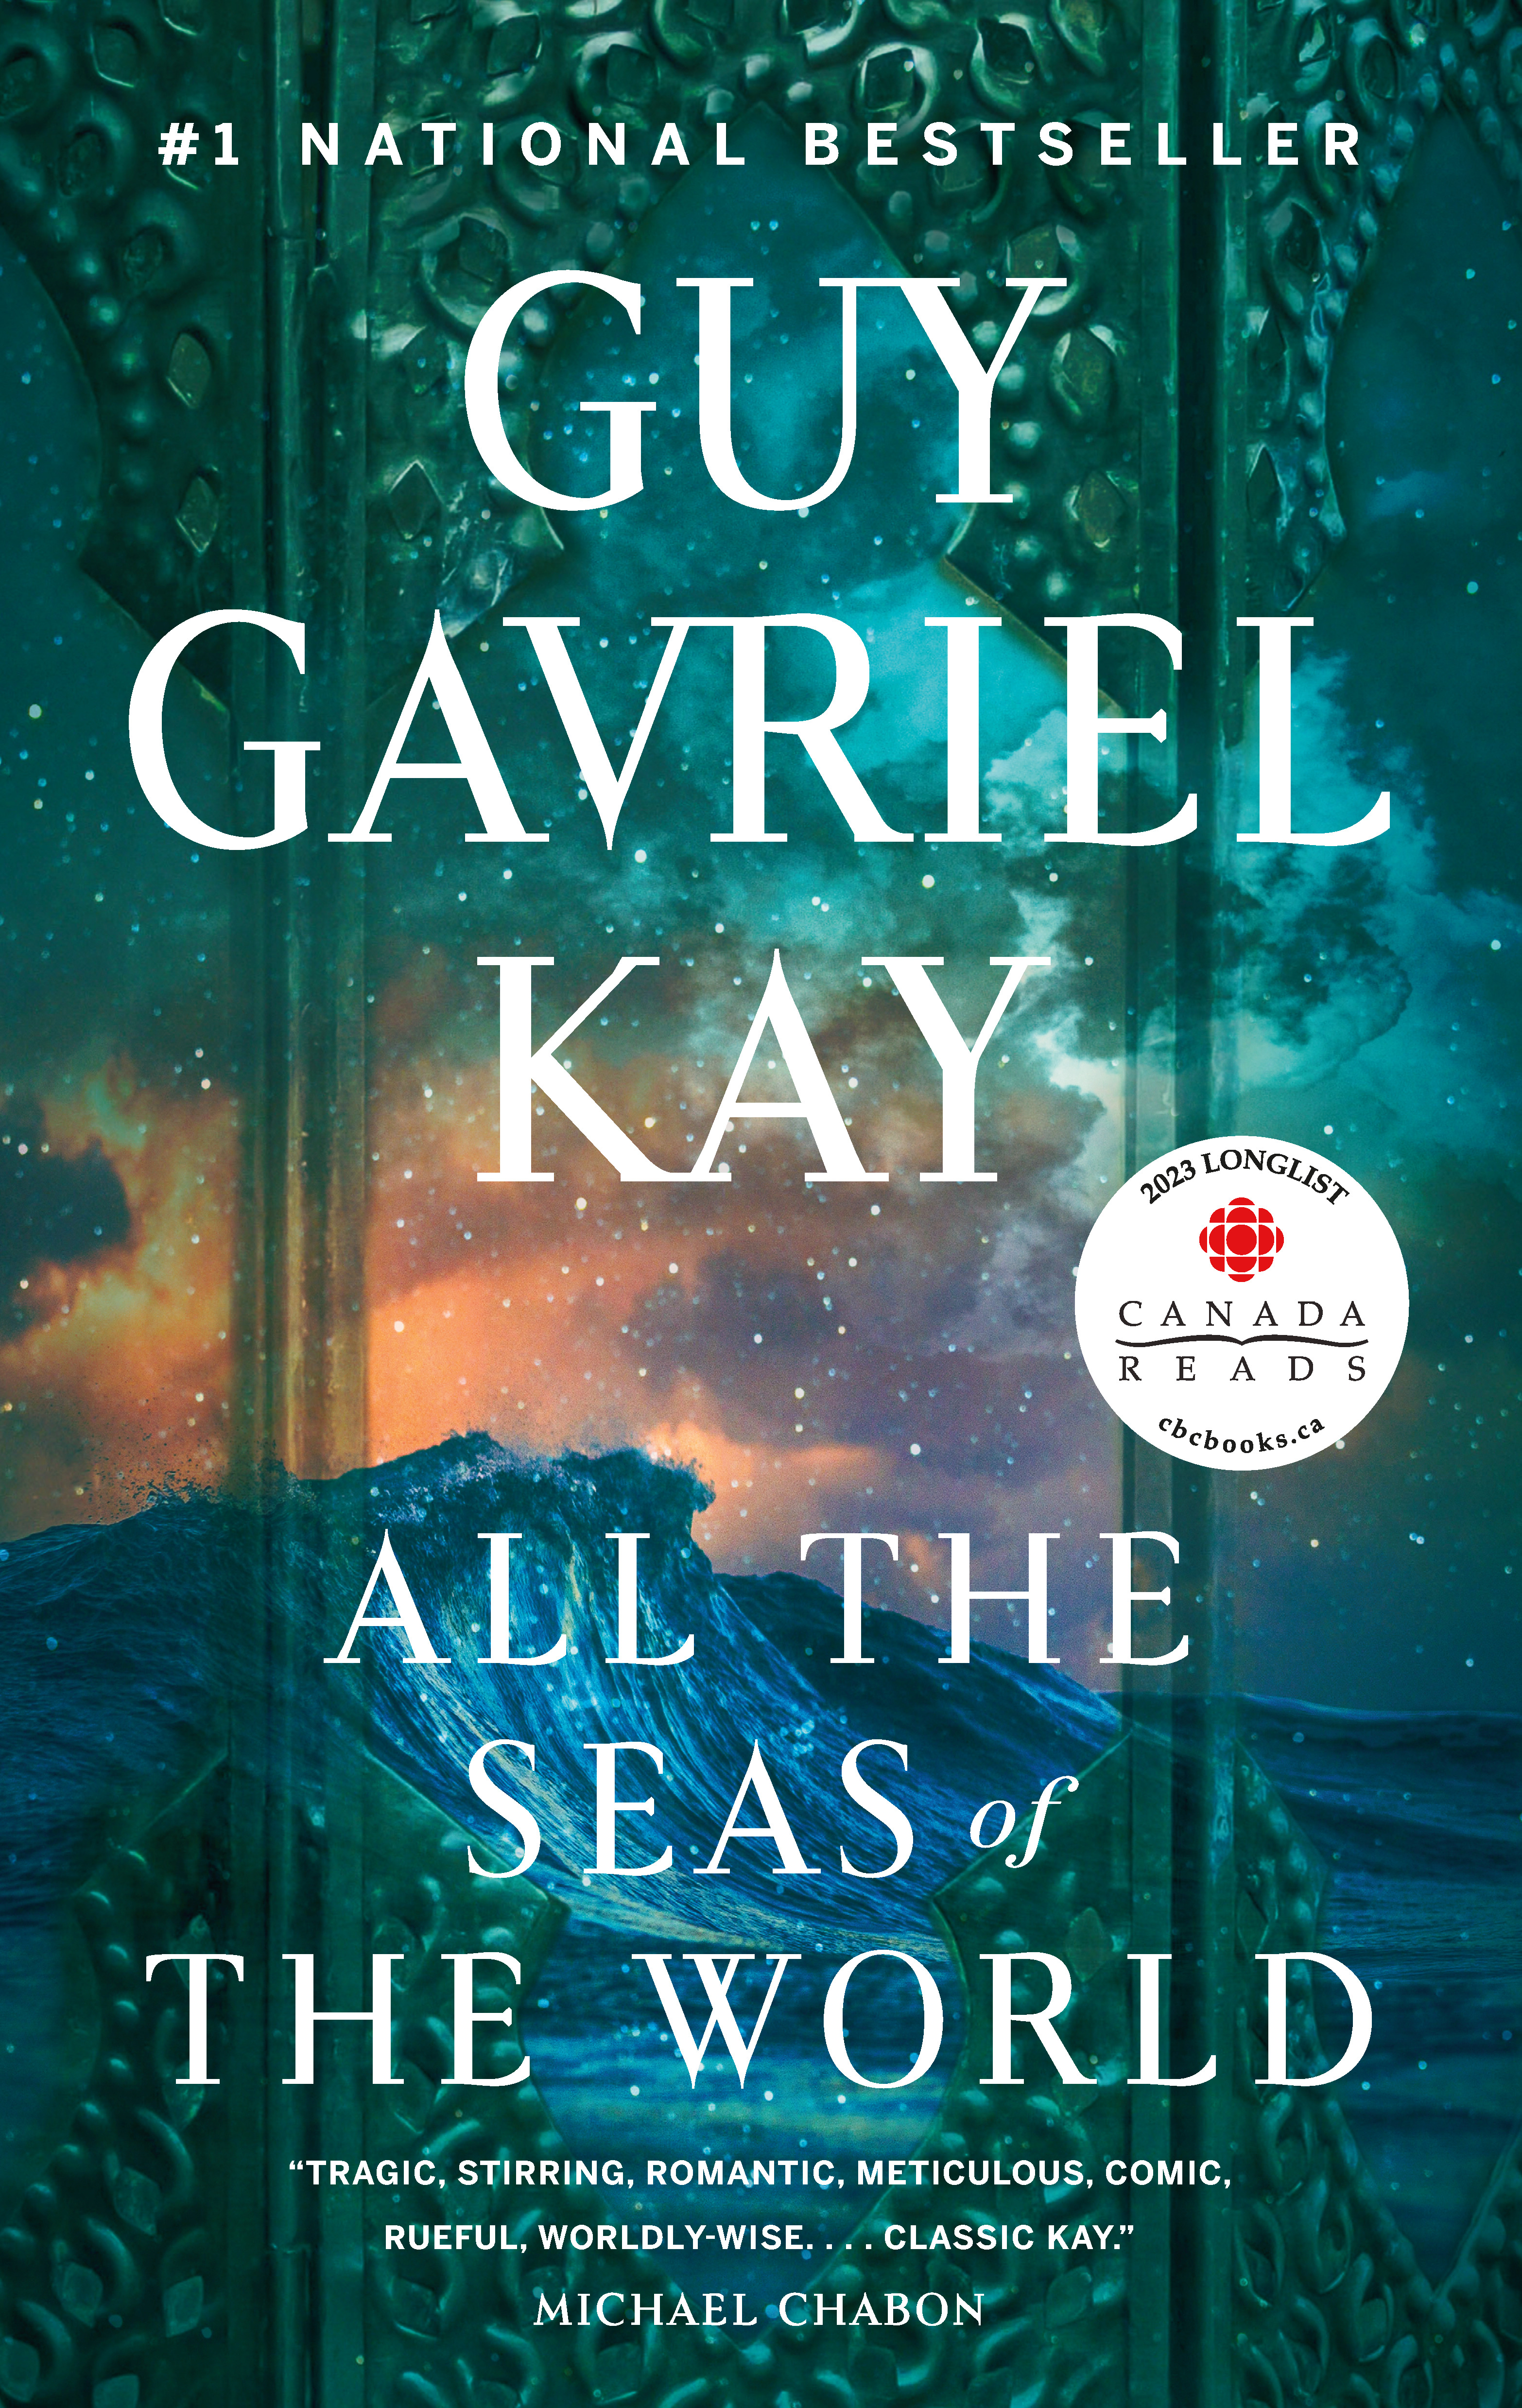 All the Seas of the World | Kay, Guy Gavriel